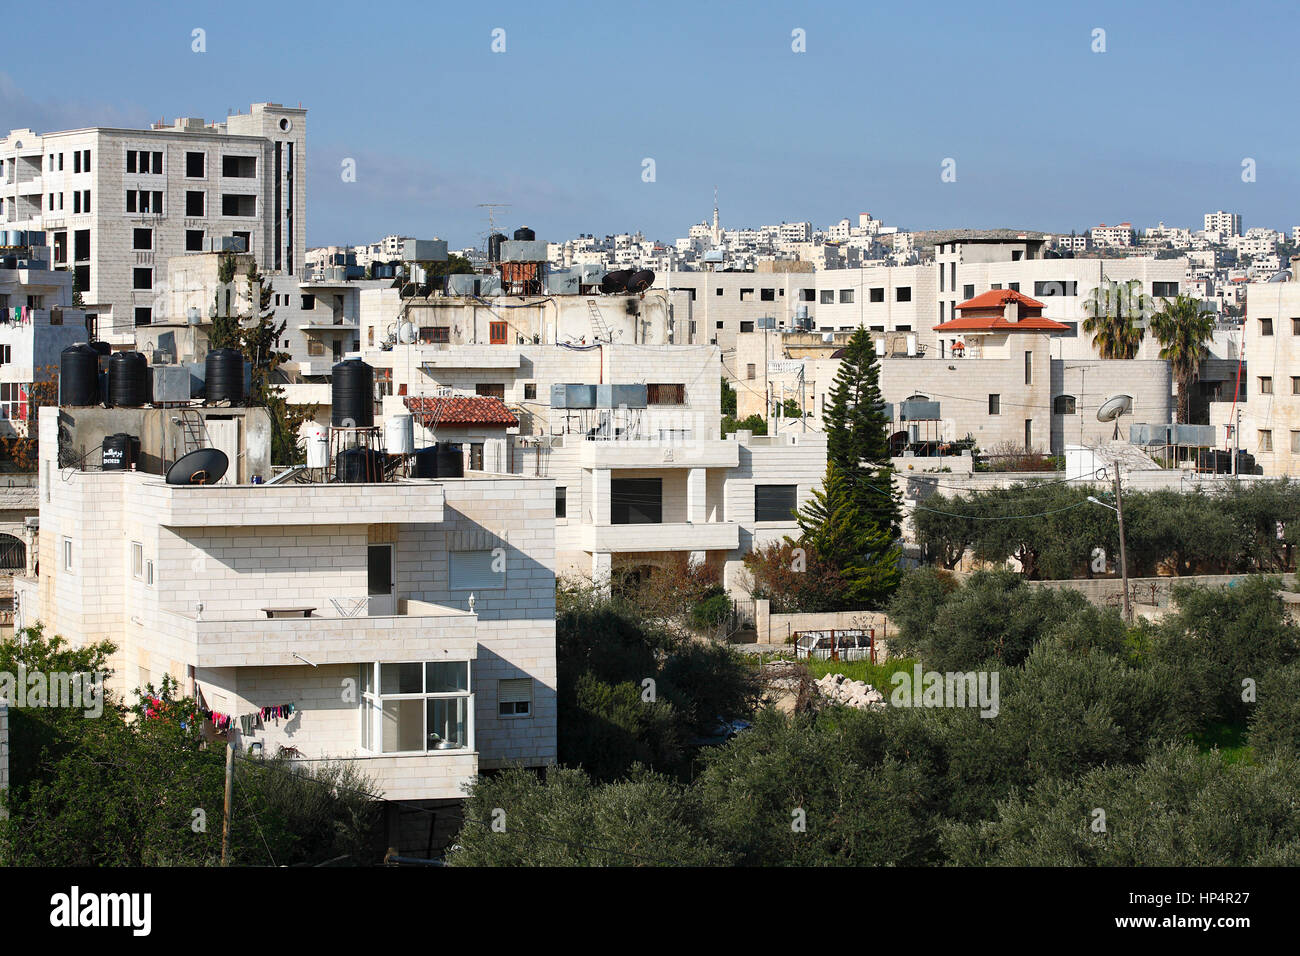 settlements and houses in city of bethlehem, palestine, west bank, israel Stock Photo